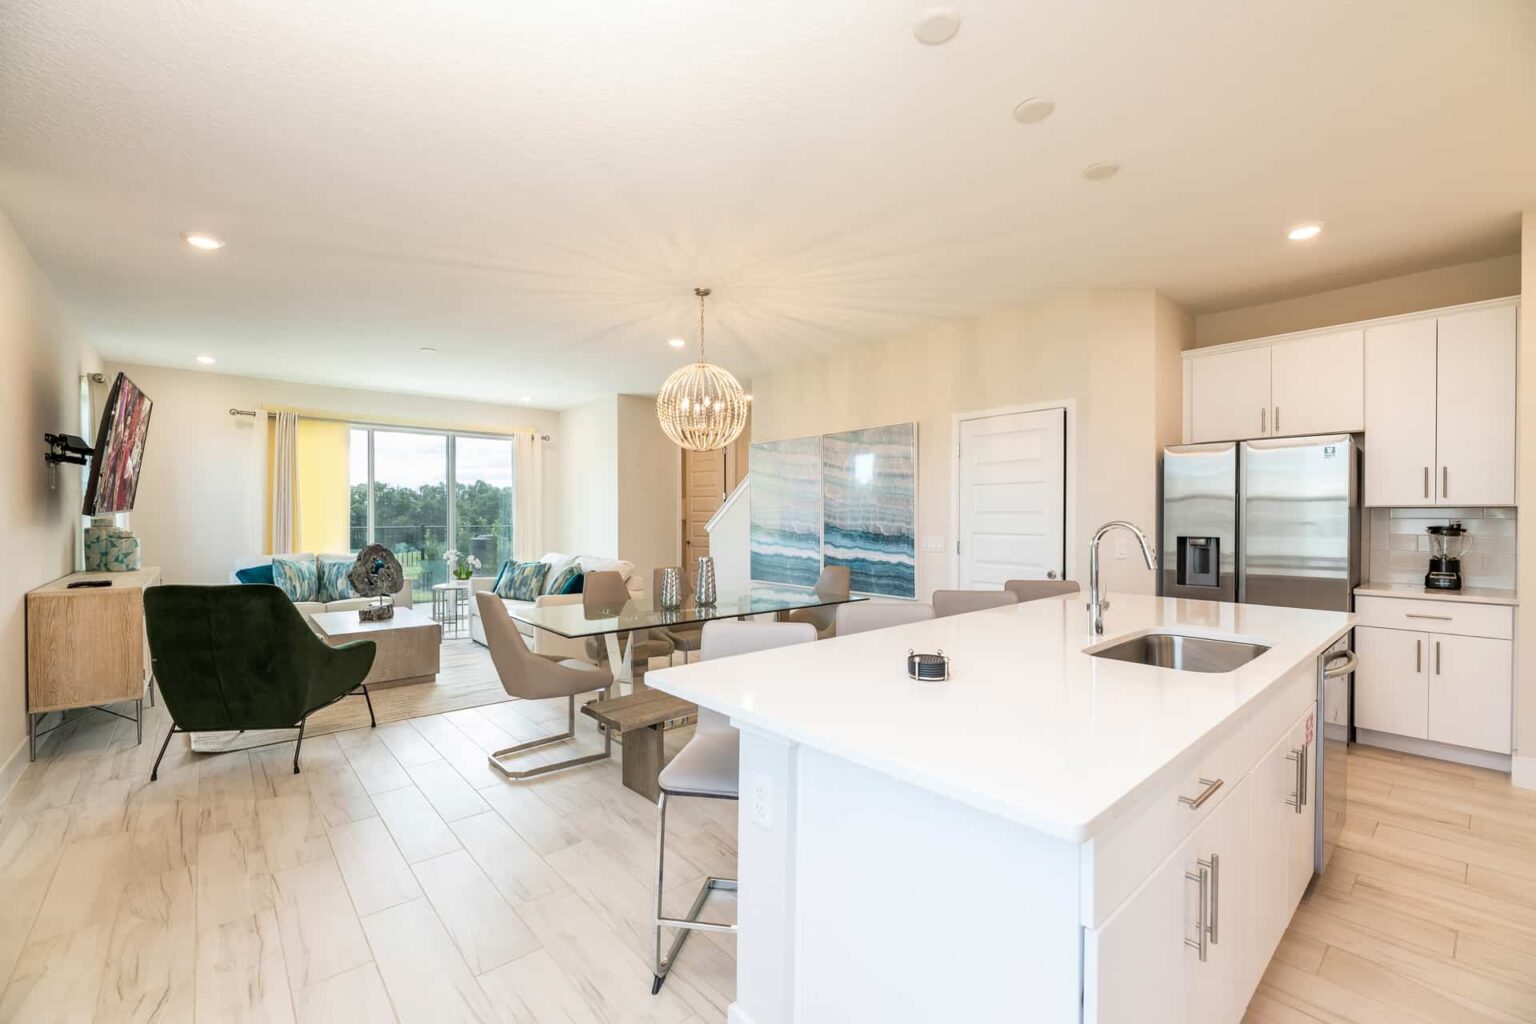 Spacious, modern kitchen, dining, and living room at Eagle Trace Resort Orlando.